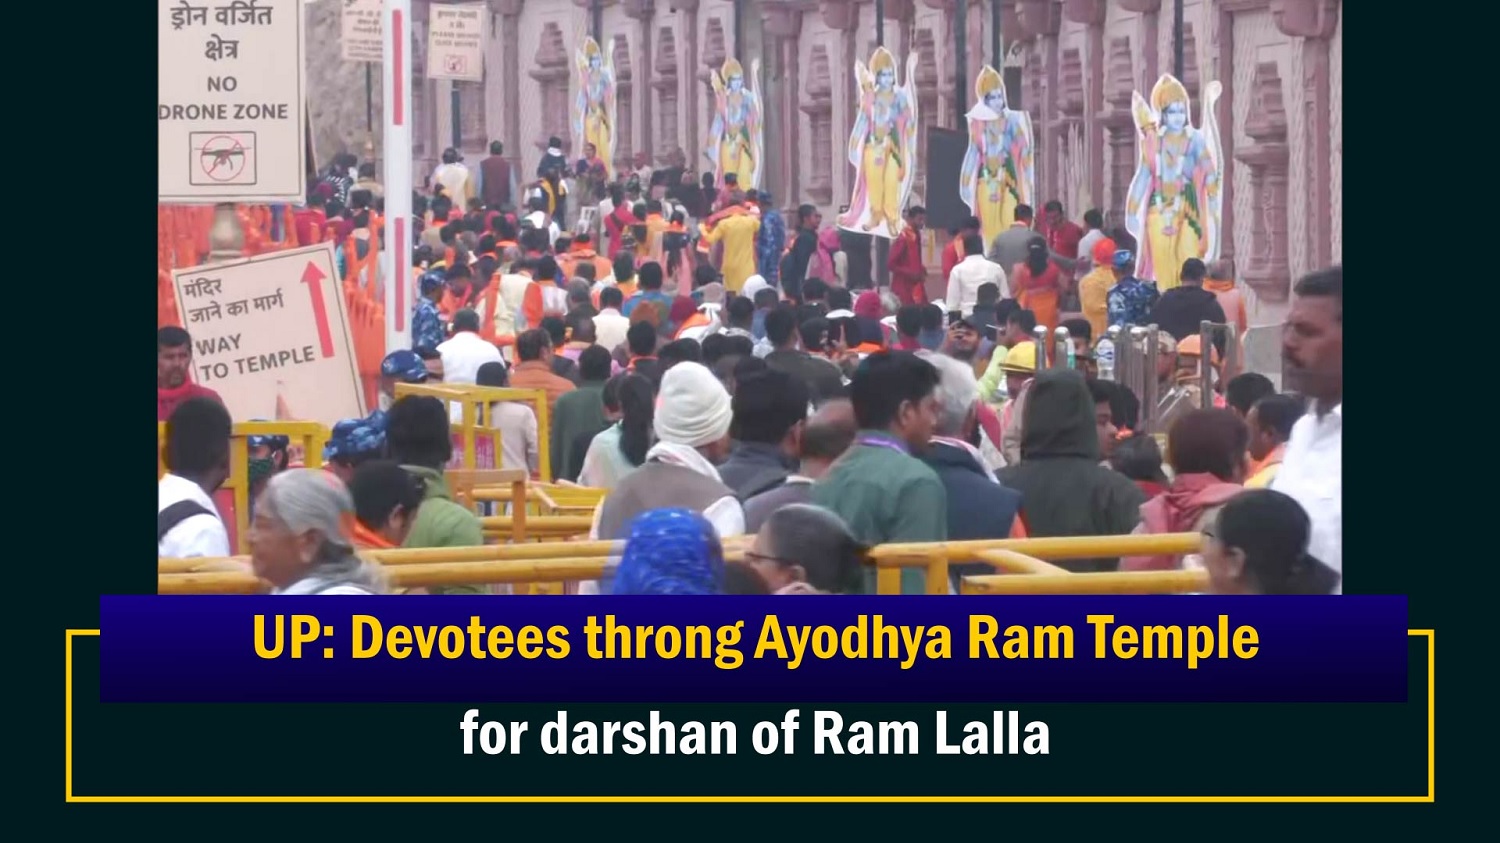 UP` Devotees throng Ayodhya Ram Temple for darshan of Ram Lalla